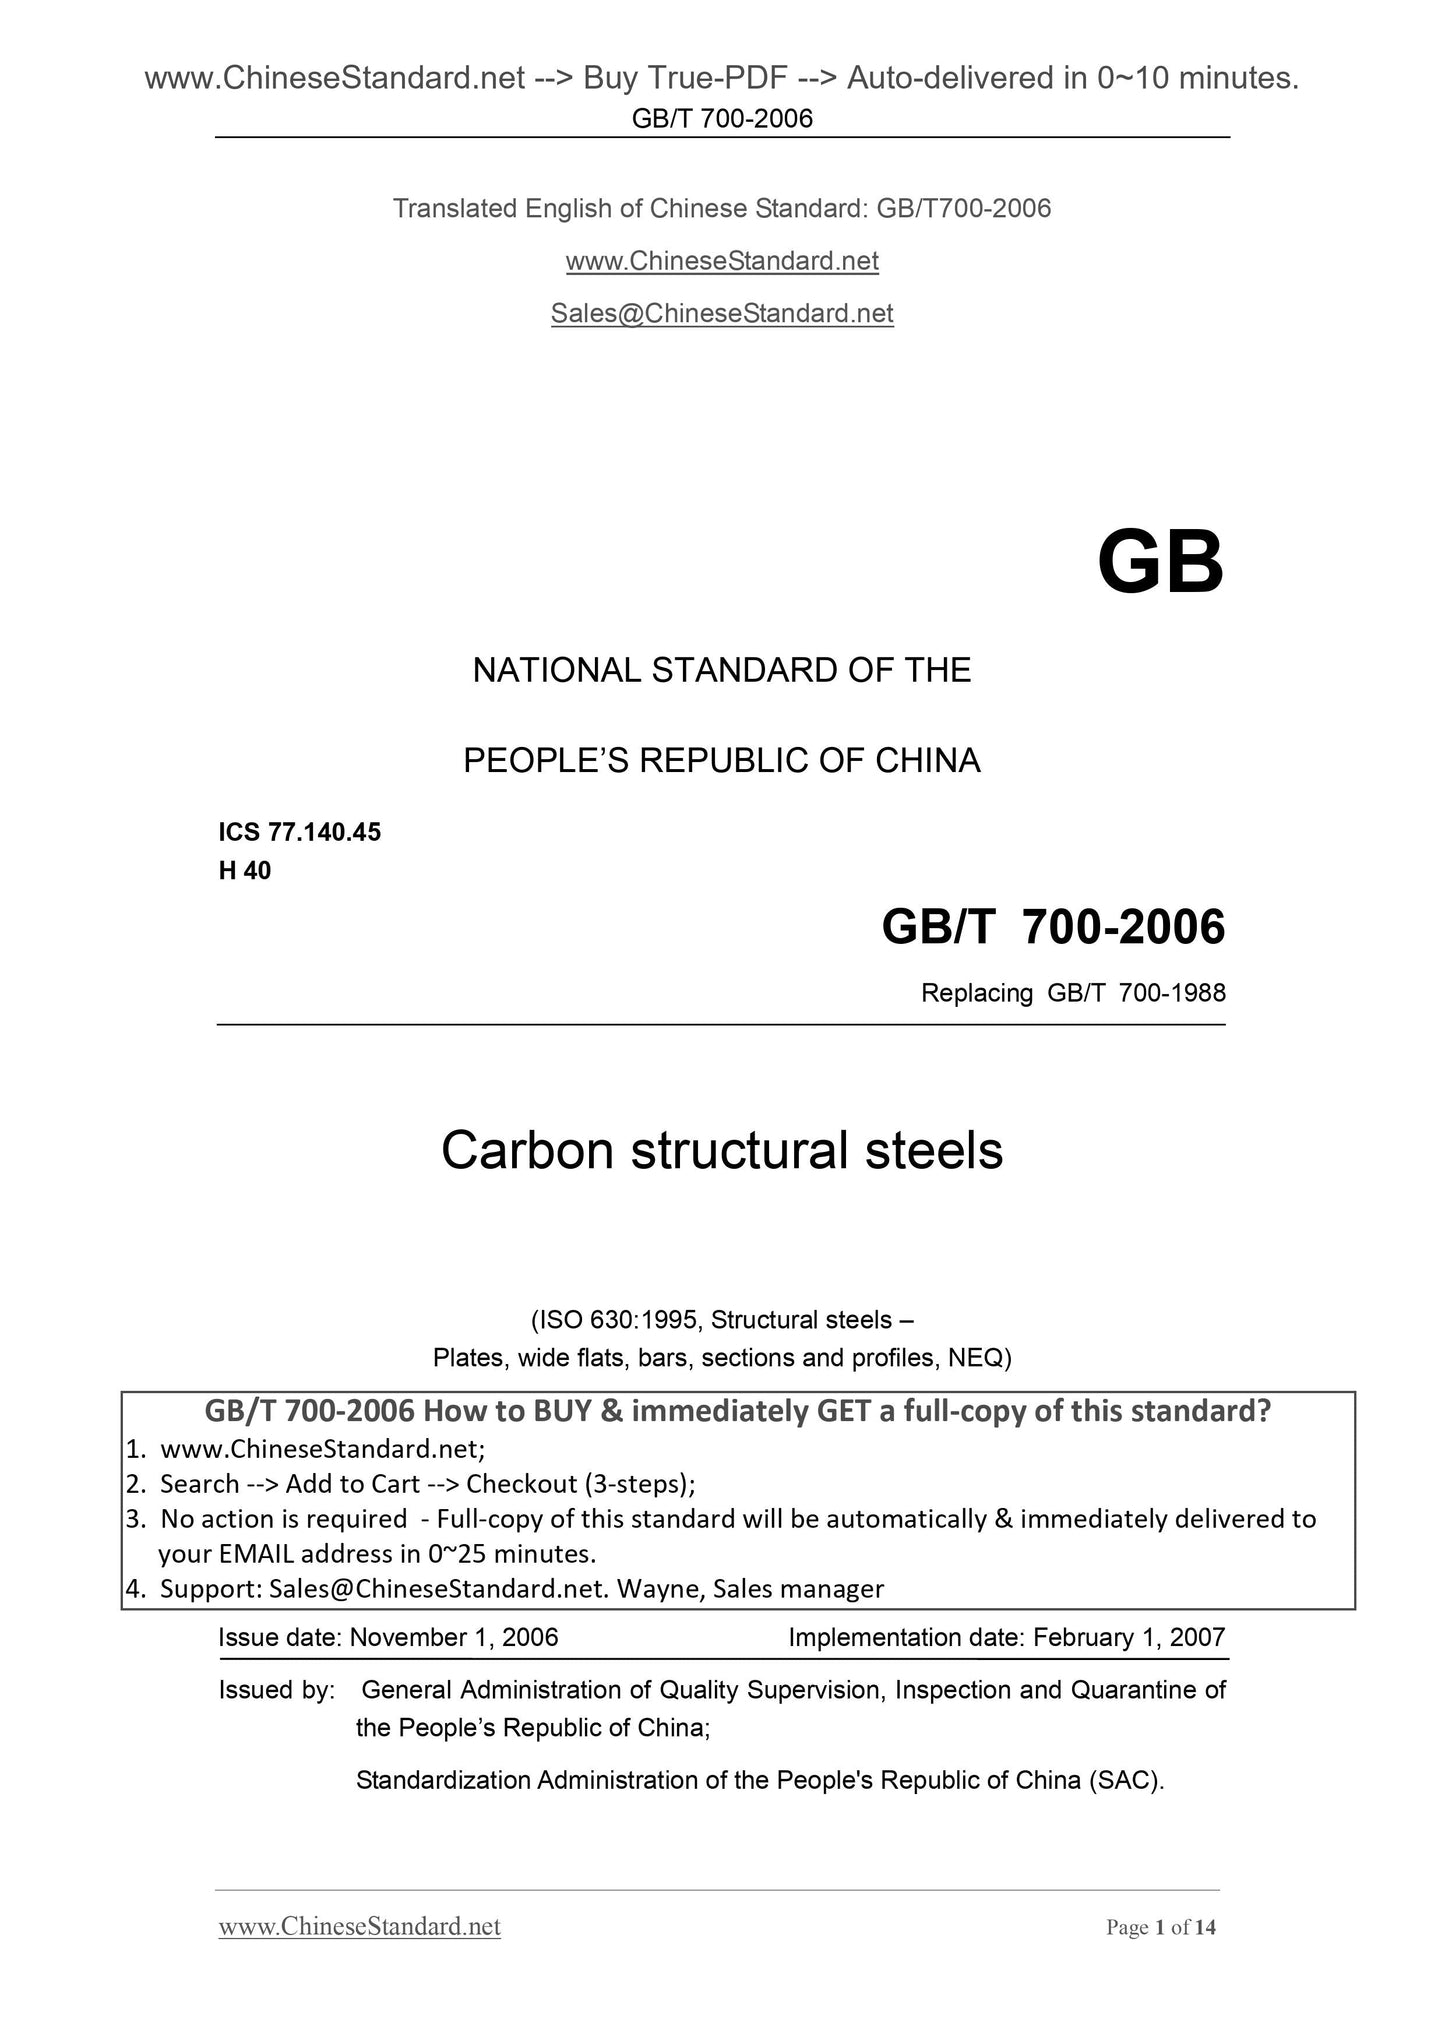 GB/T 700-2006 Page 1